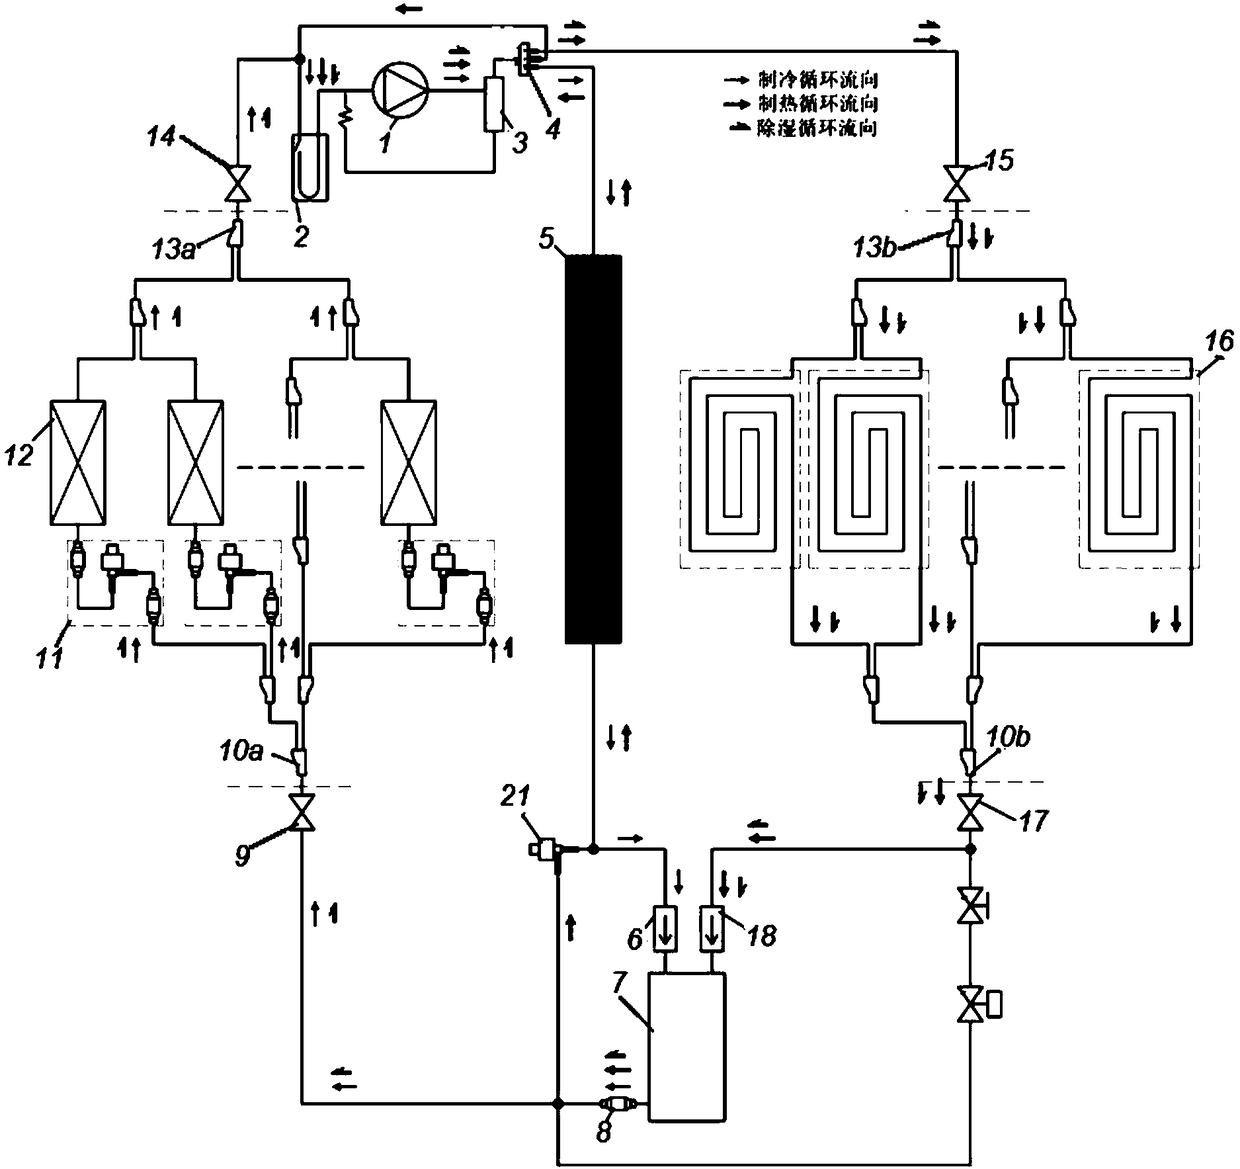 Multi-functional multi-connected air-conditioning system